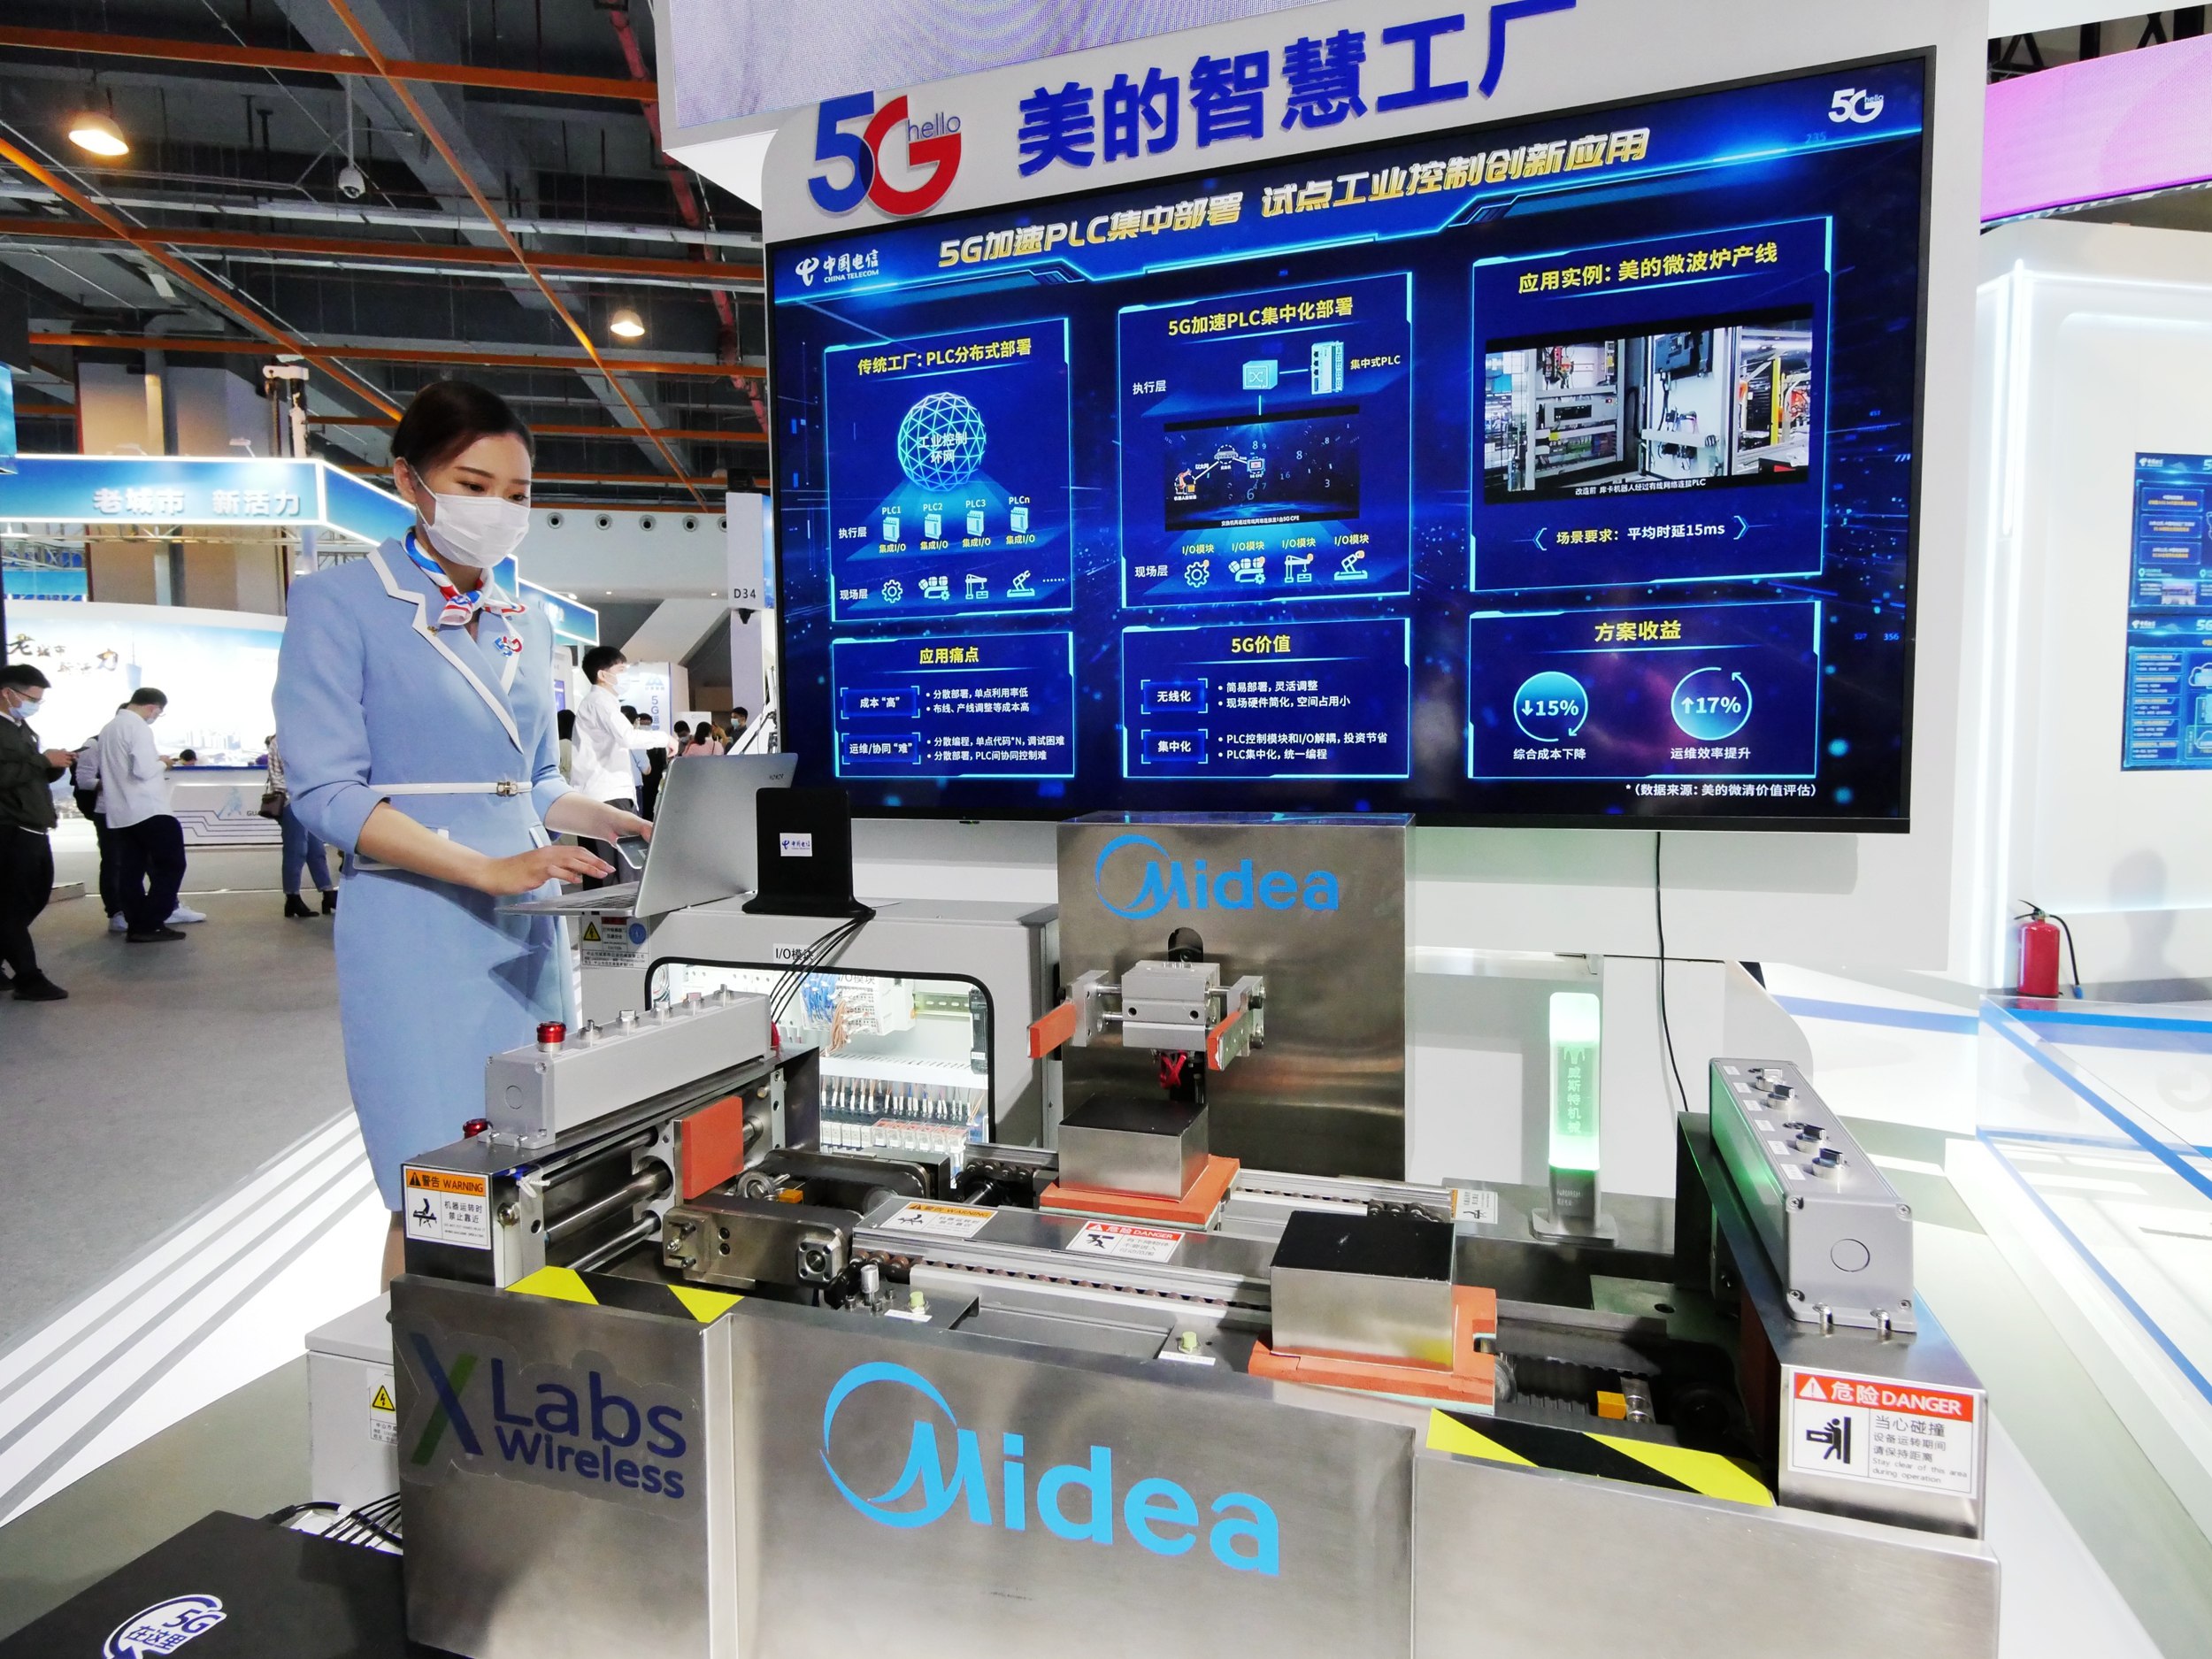 Midea’s booth during the 2020 World 5G Convention at Nan Fung International Convention & Exhibition Center in Guangzhou city on November 27, 2020. Photo: Getty Images.